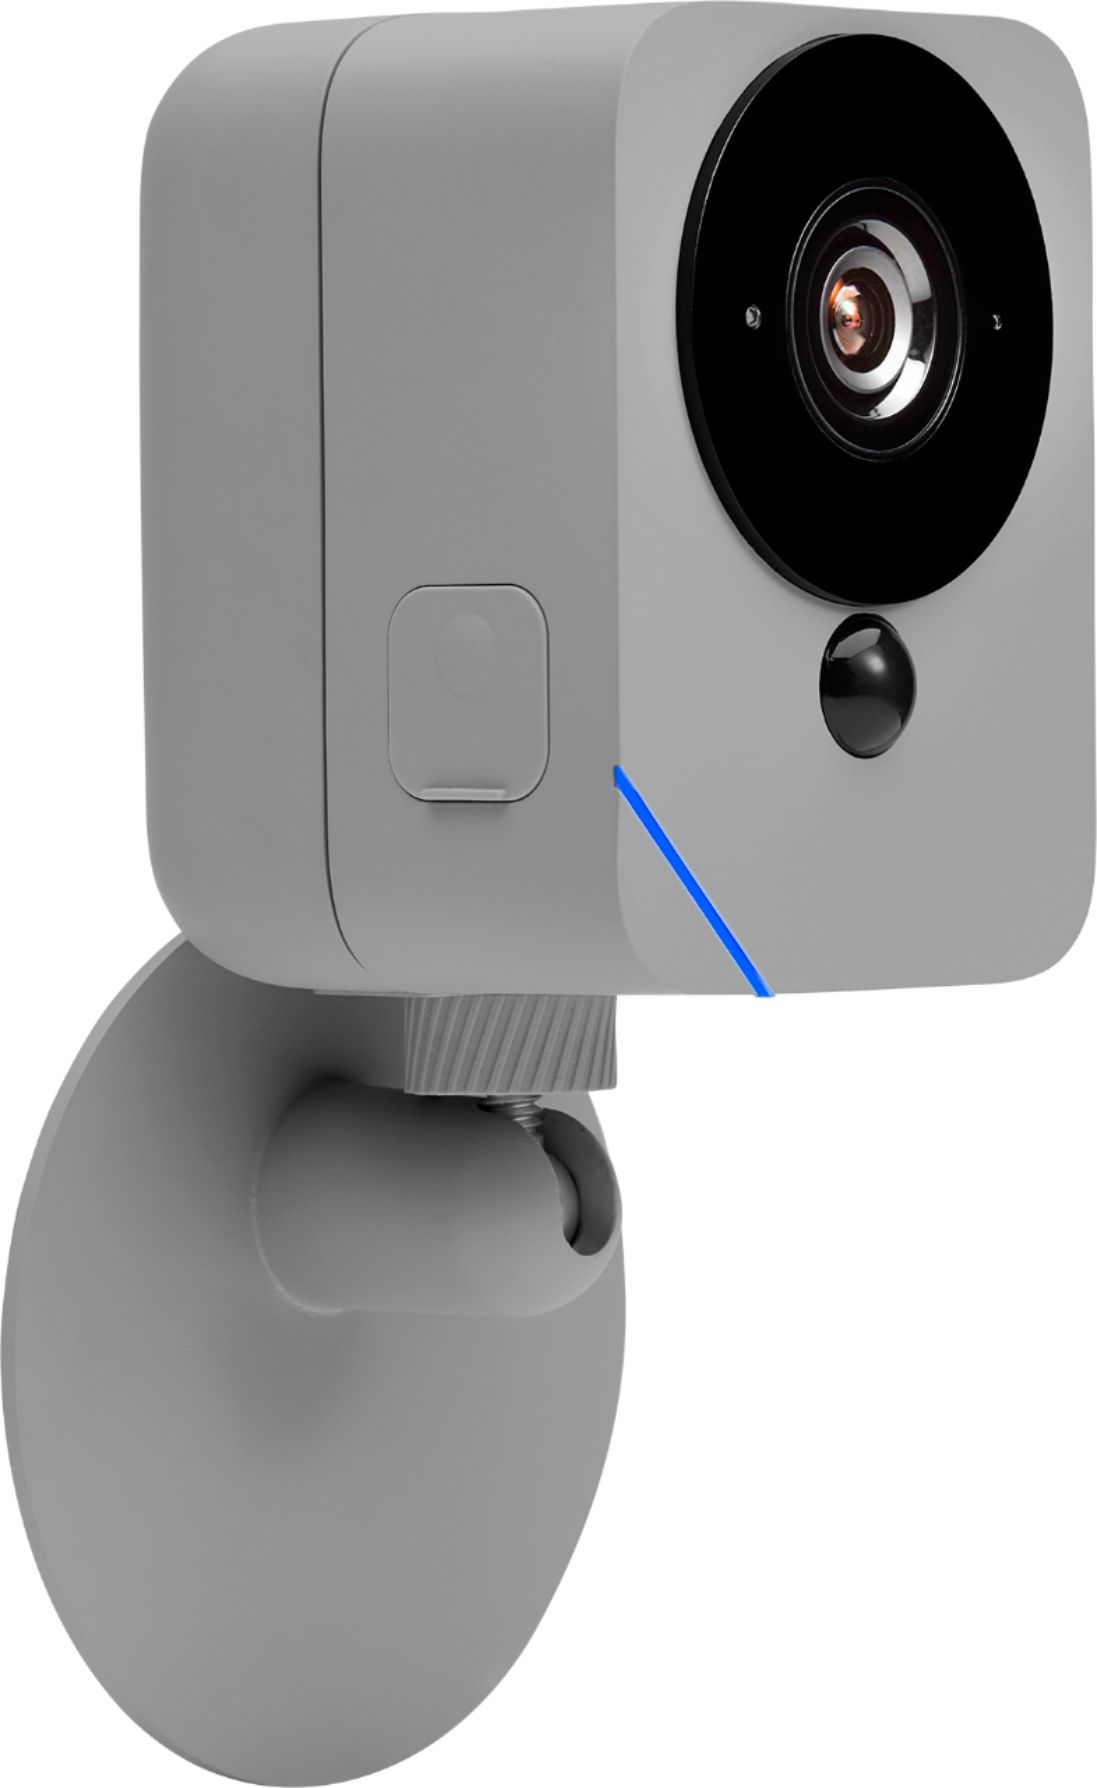 Angle View: Ring - Refurbished Stick Up Indoor/Outdoor Wire-Free 1080p Security Camera - Black